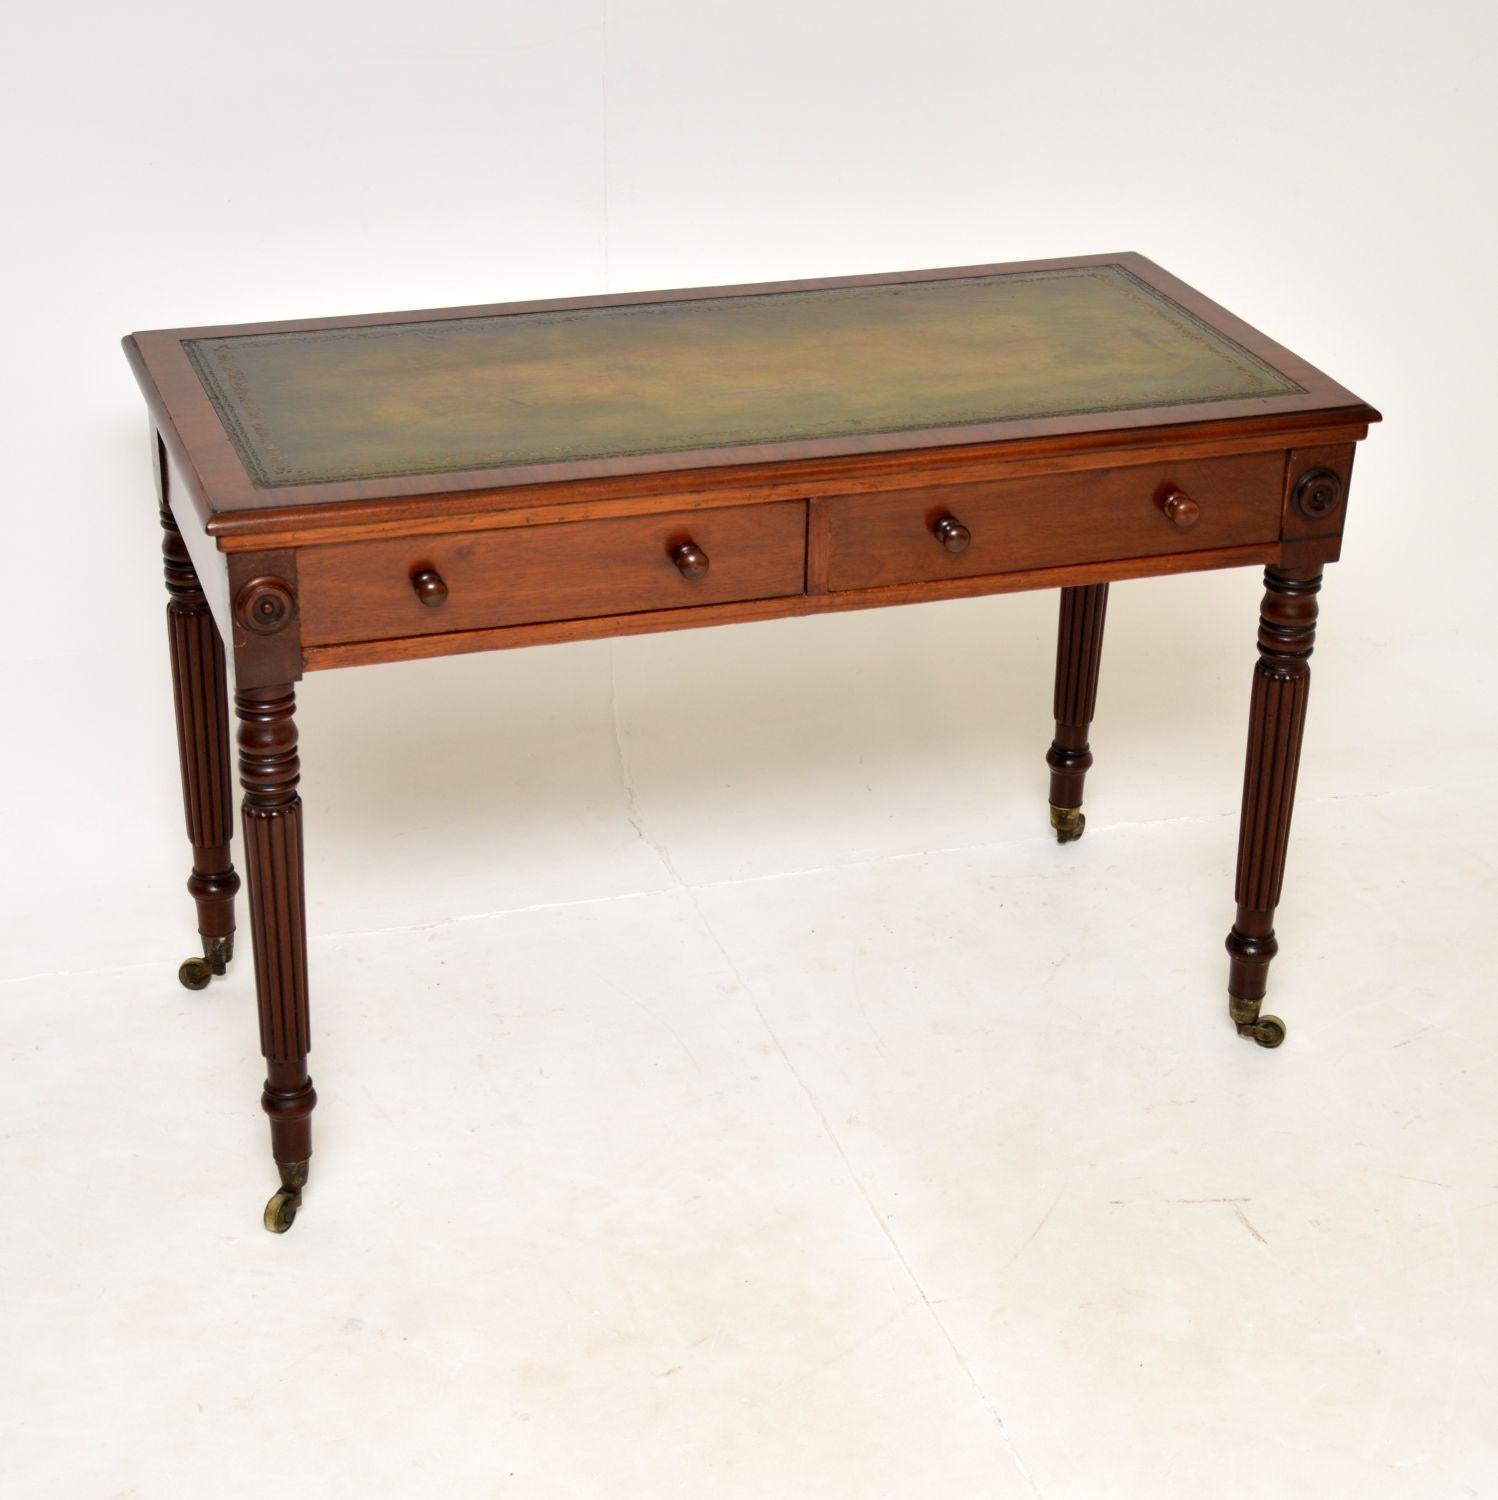 A fine antique Victorian period writing desk. This was made in England, it dates from around 1840-1860.

It has a beautifully elegant yet sturdy design, and is extremely well made. This sits on beautiful turned and fluted legs, which sit on